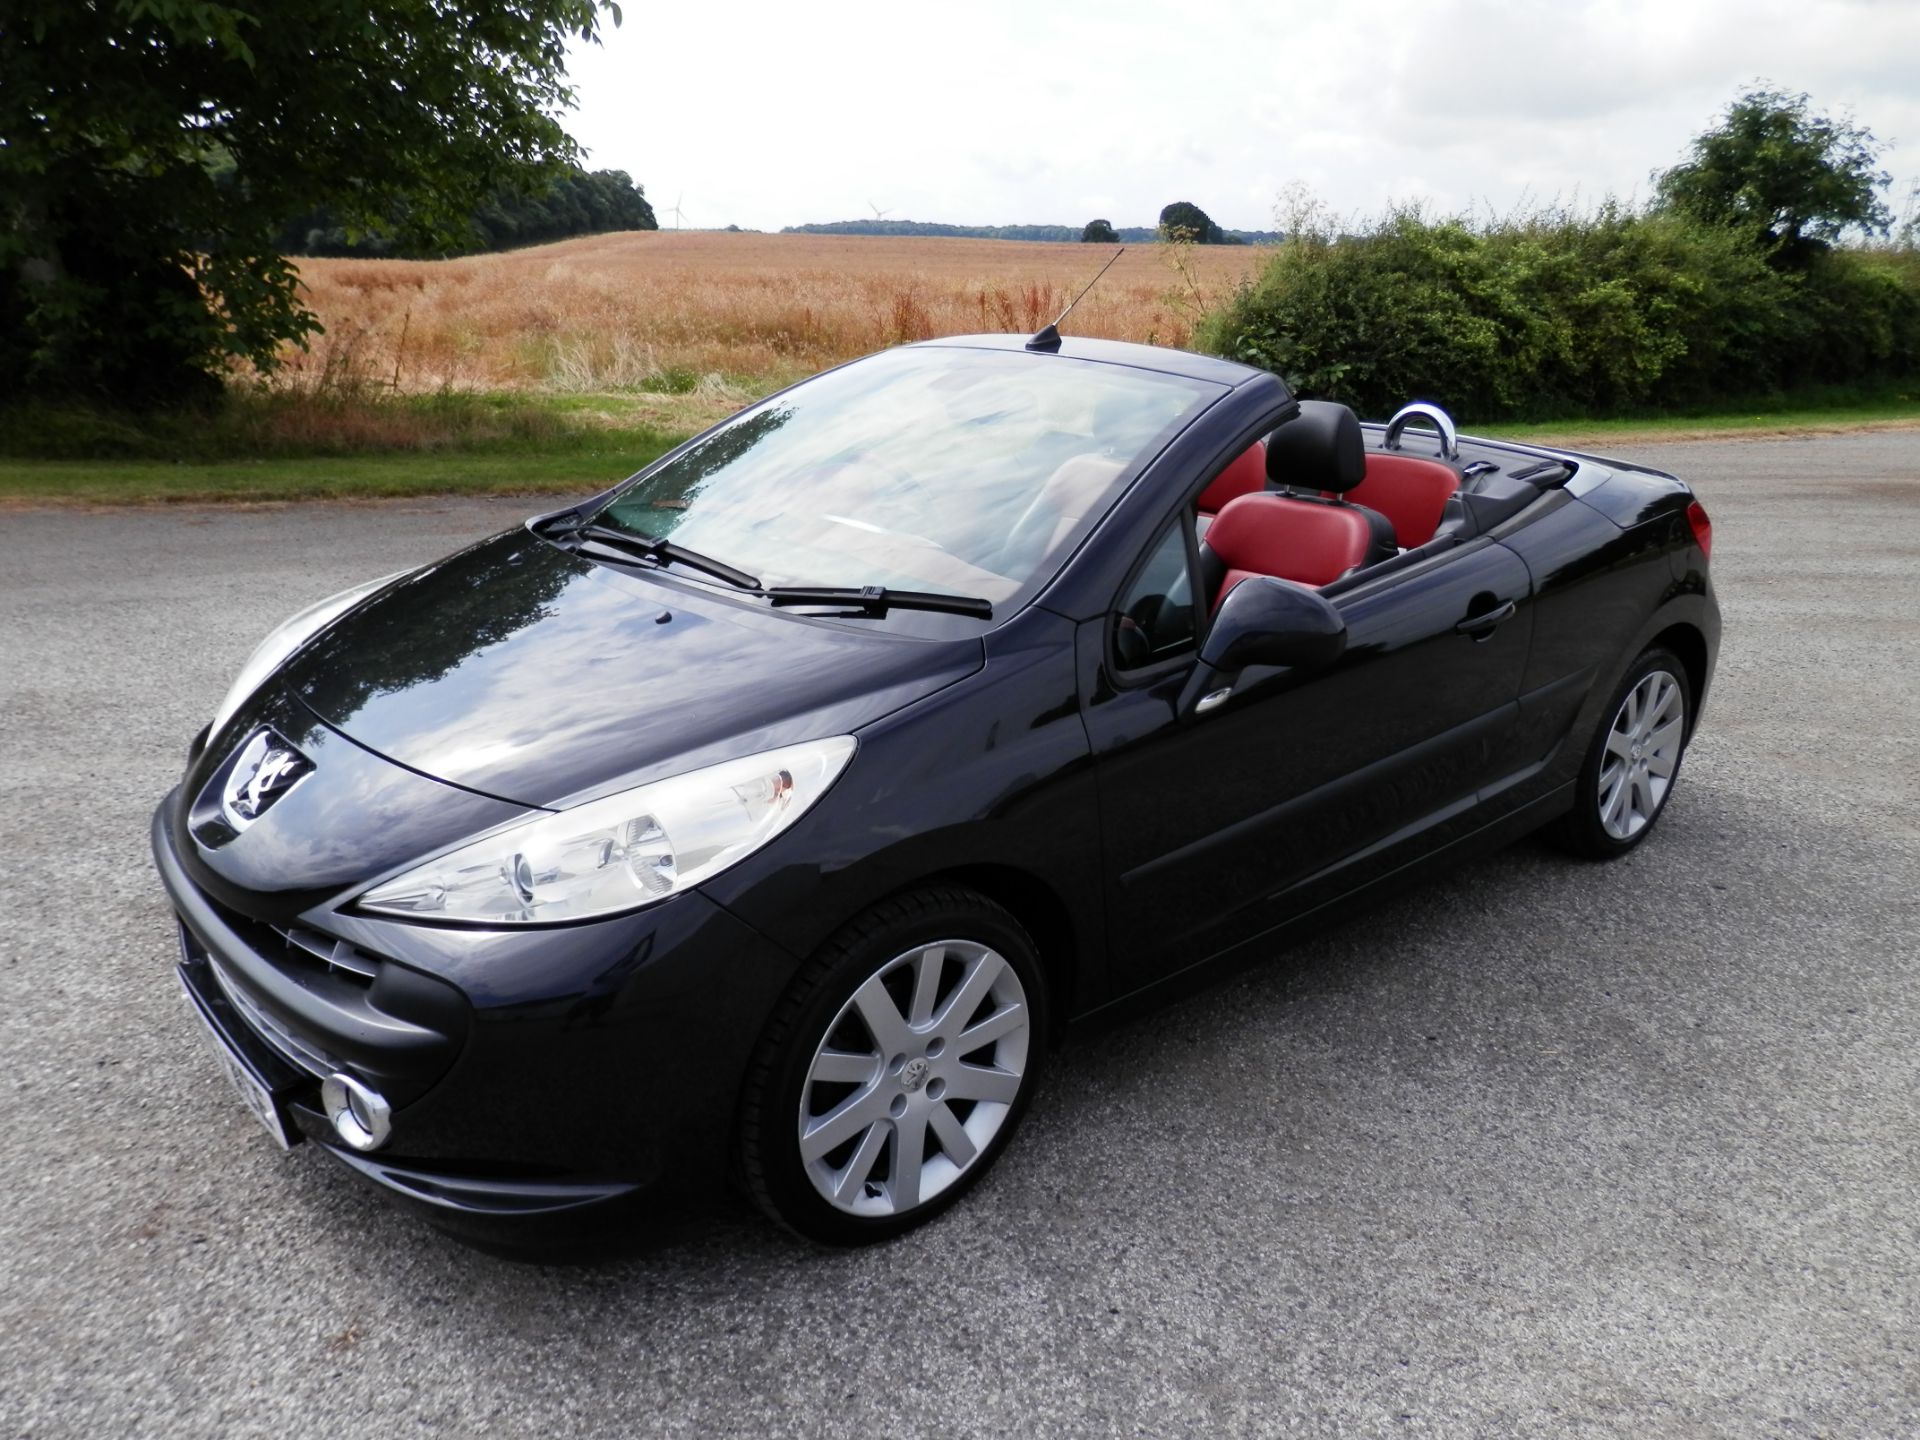 2007/07 PEUGEOT 207 COUPE CABRIOLET - 1.6 16V GT THP 2dr, WITH 2 TONE BLACK & READ LEATHER INTERIOR.